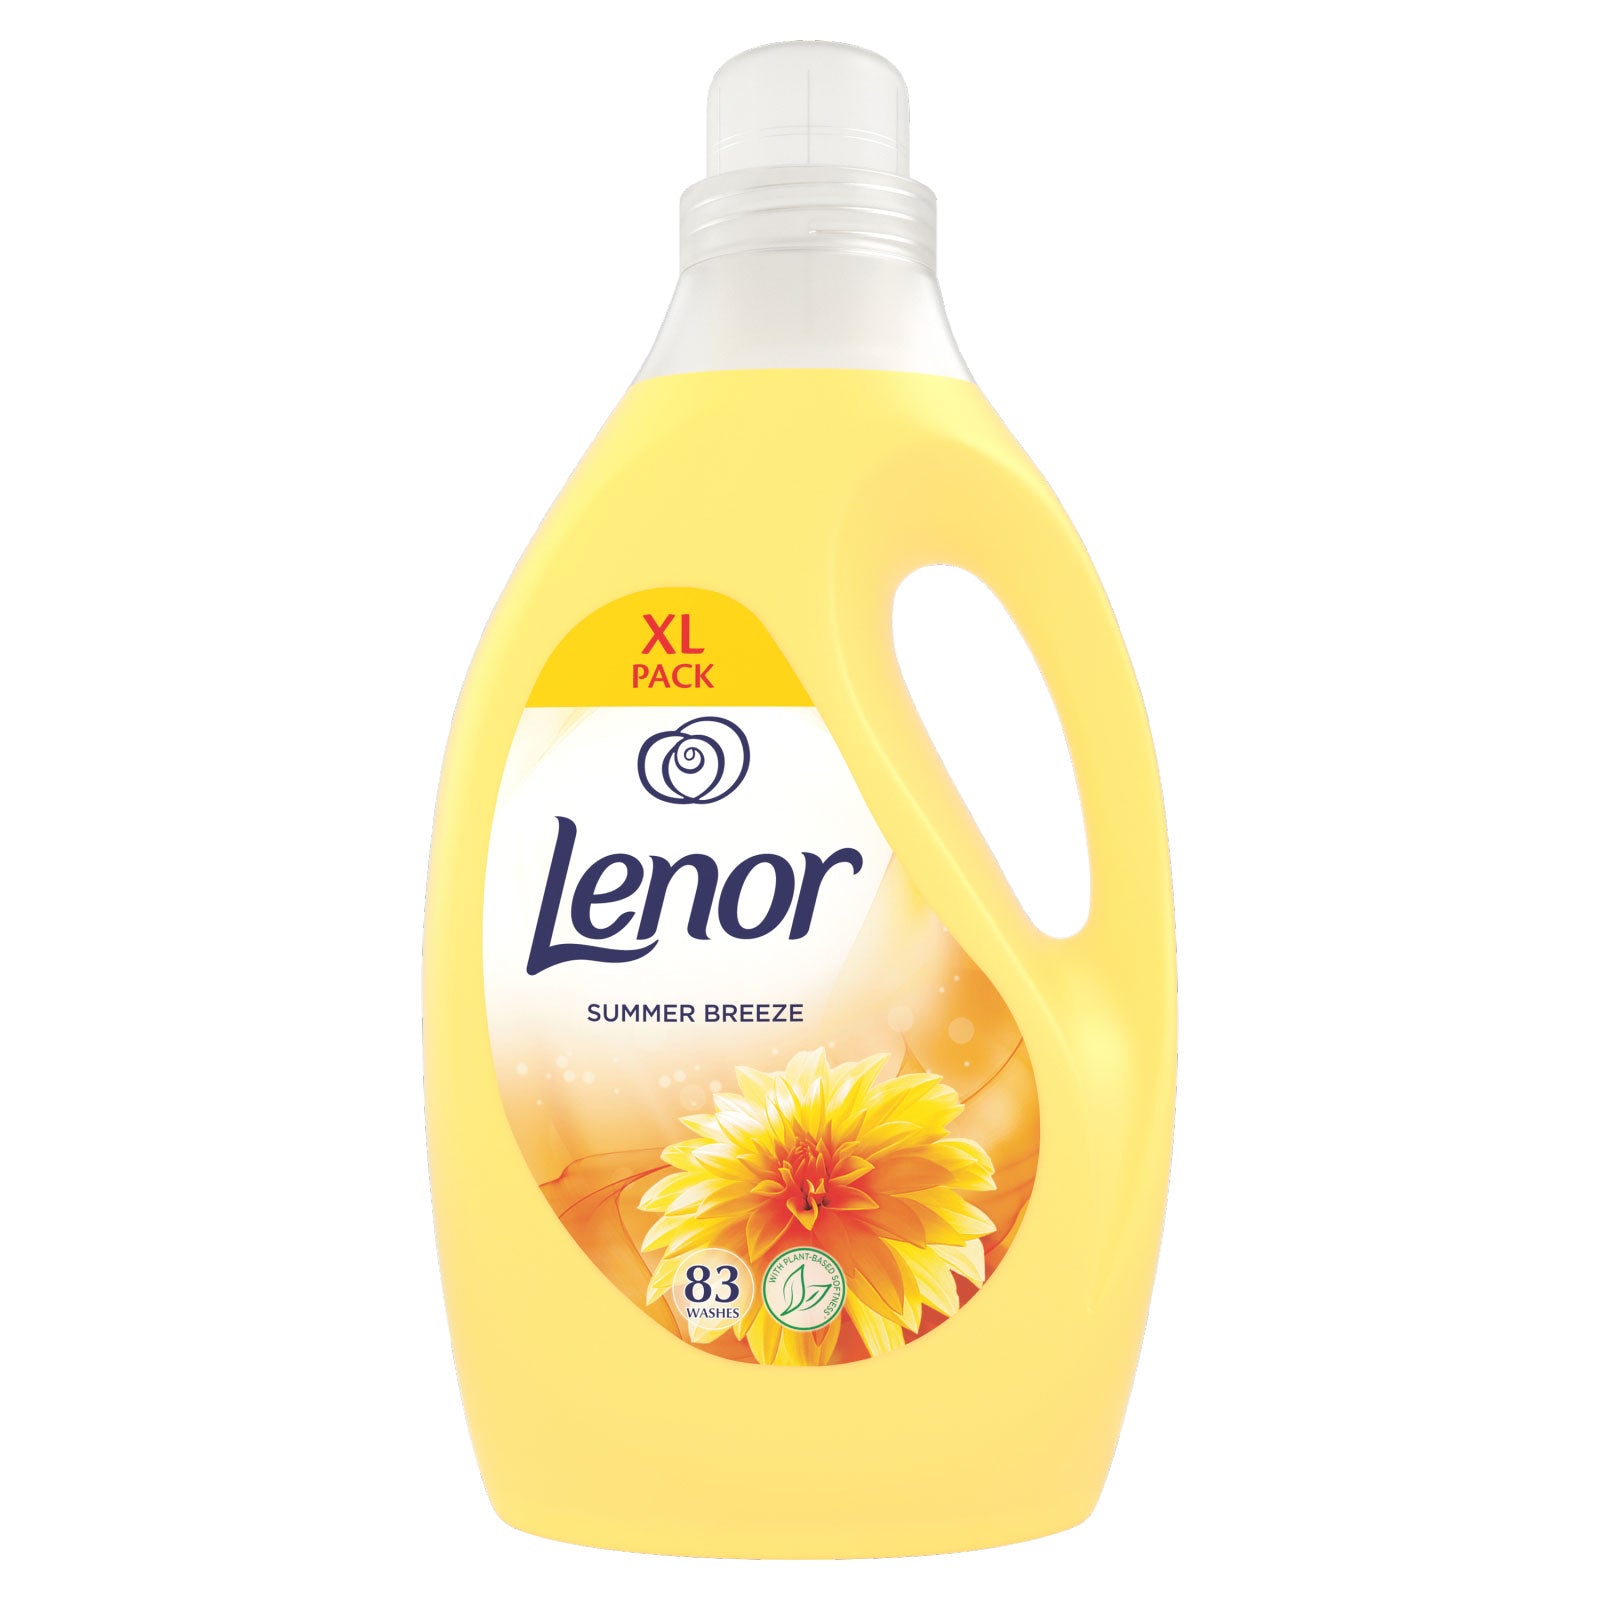 Lenor Fabric Conditioner Summer Breeze 83 Washes